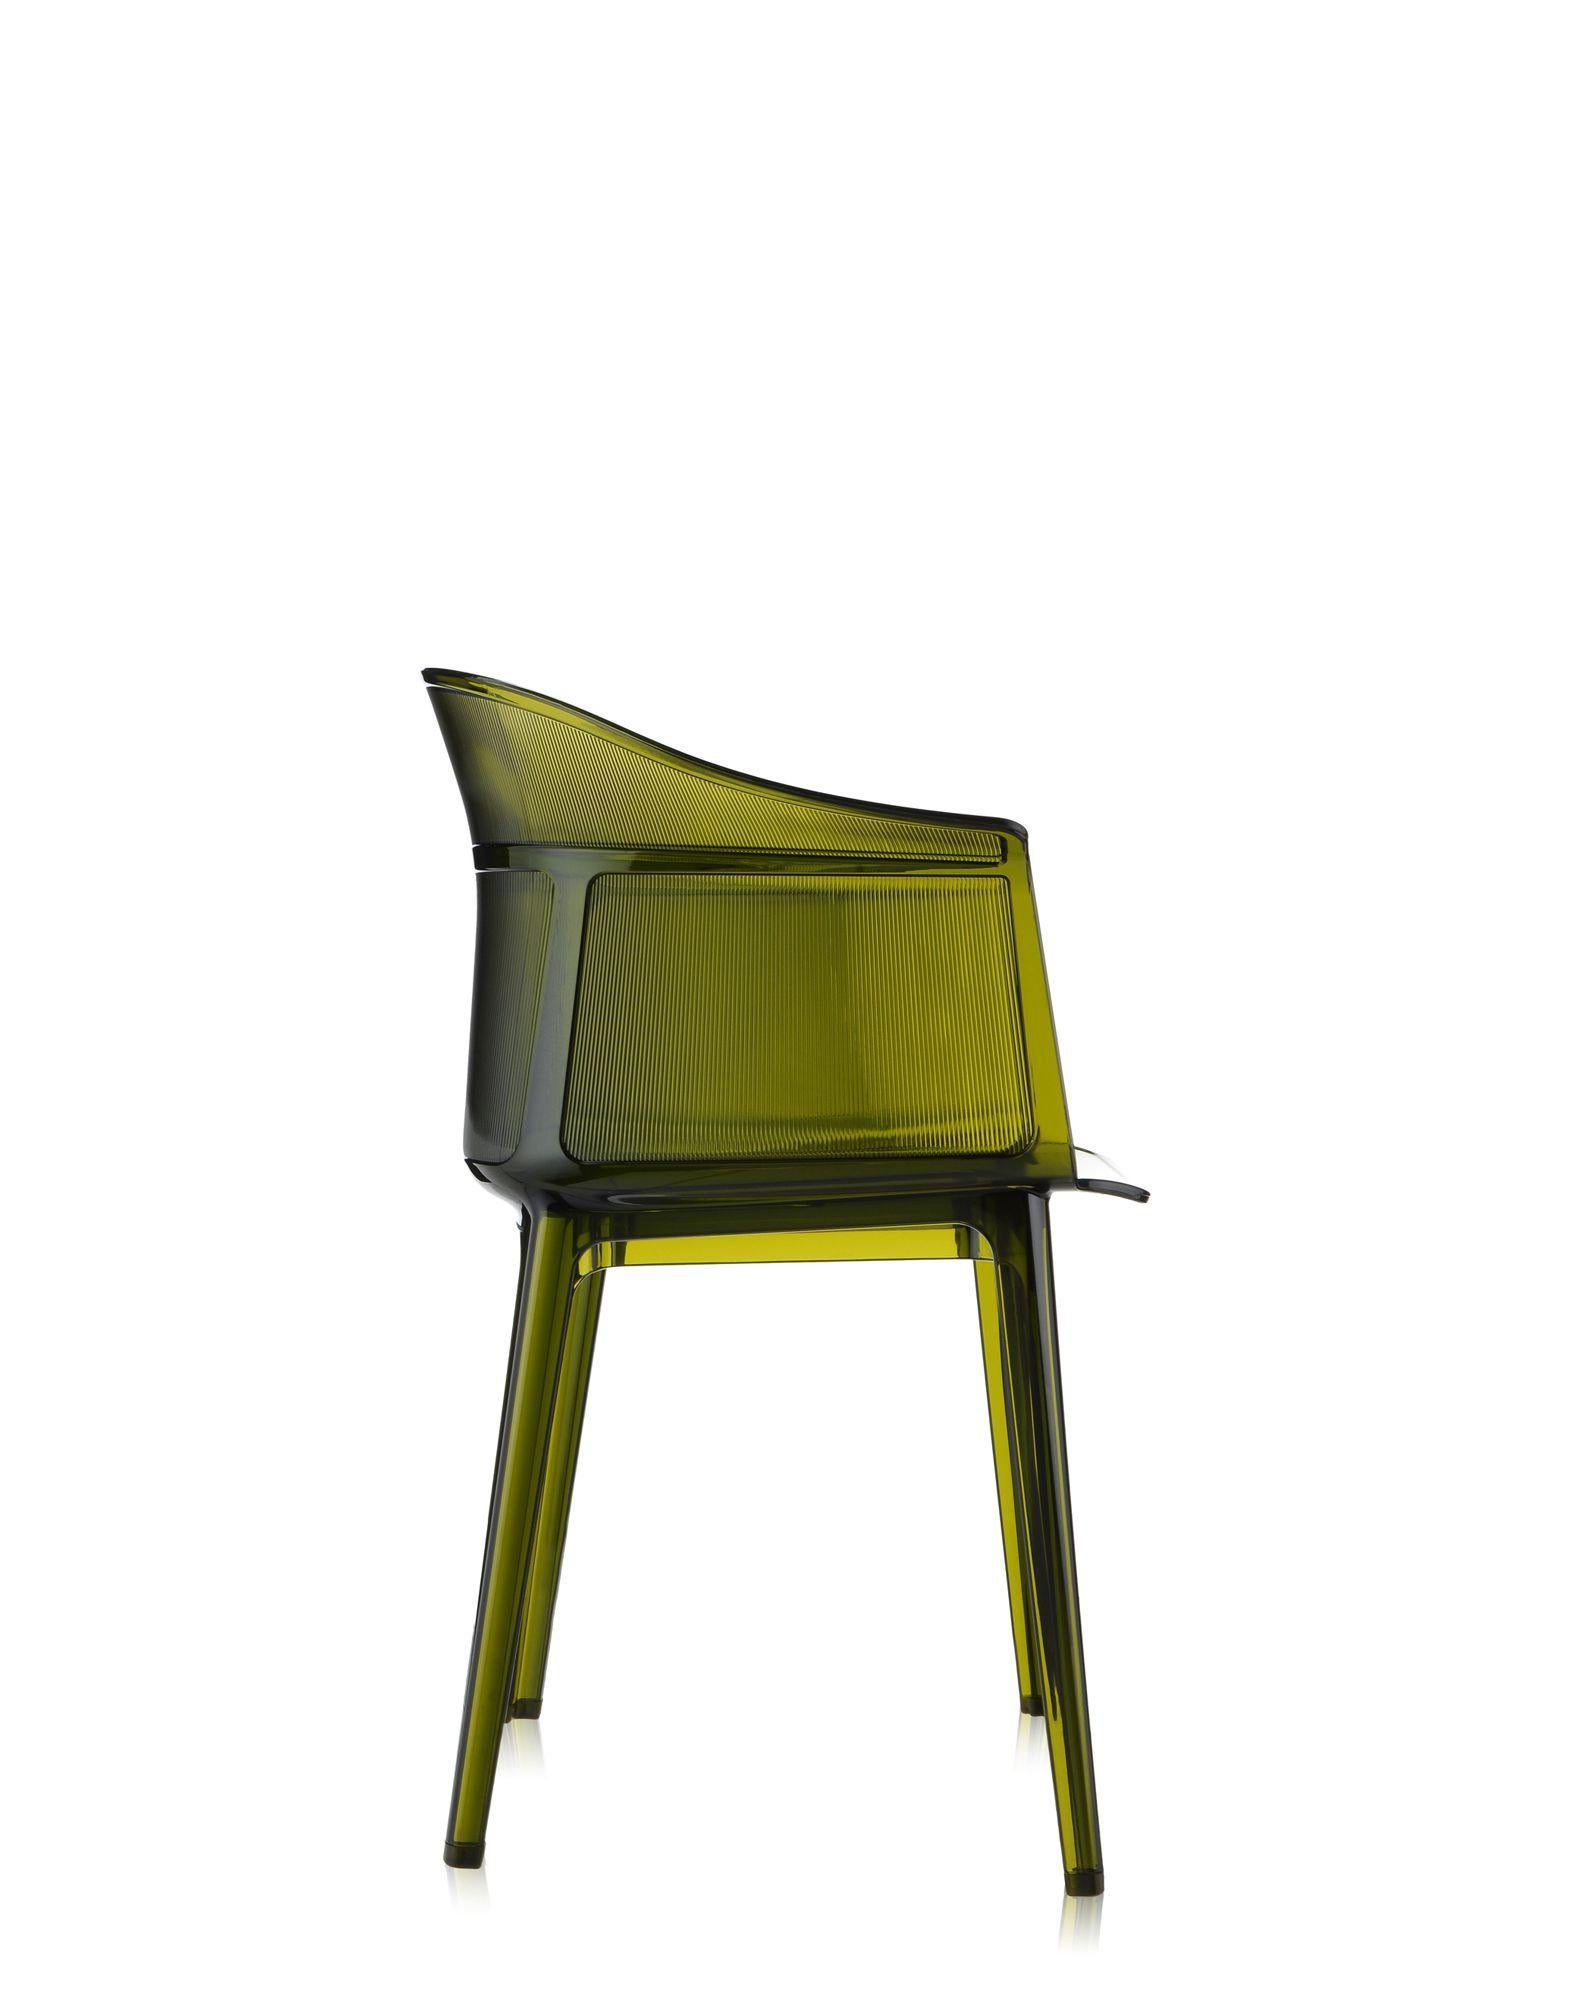 Modern Set of 2 Kartell Papyrus Chair in Olive Green by Ronan & Erwan Bouroullec For Sale